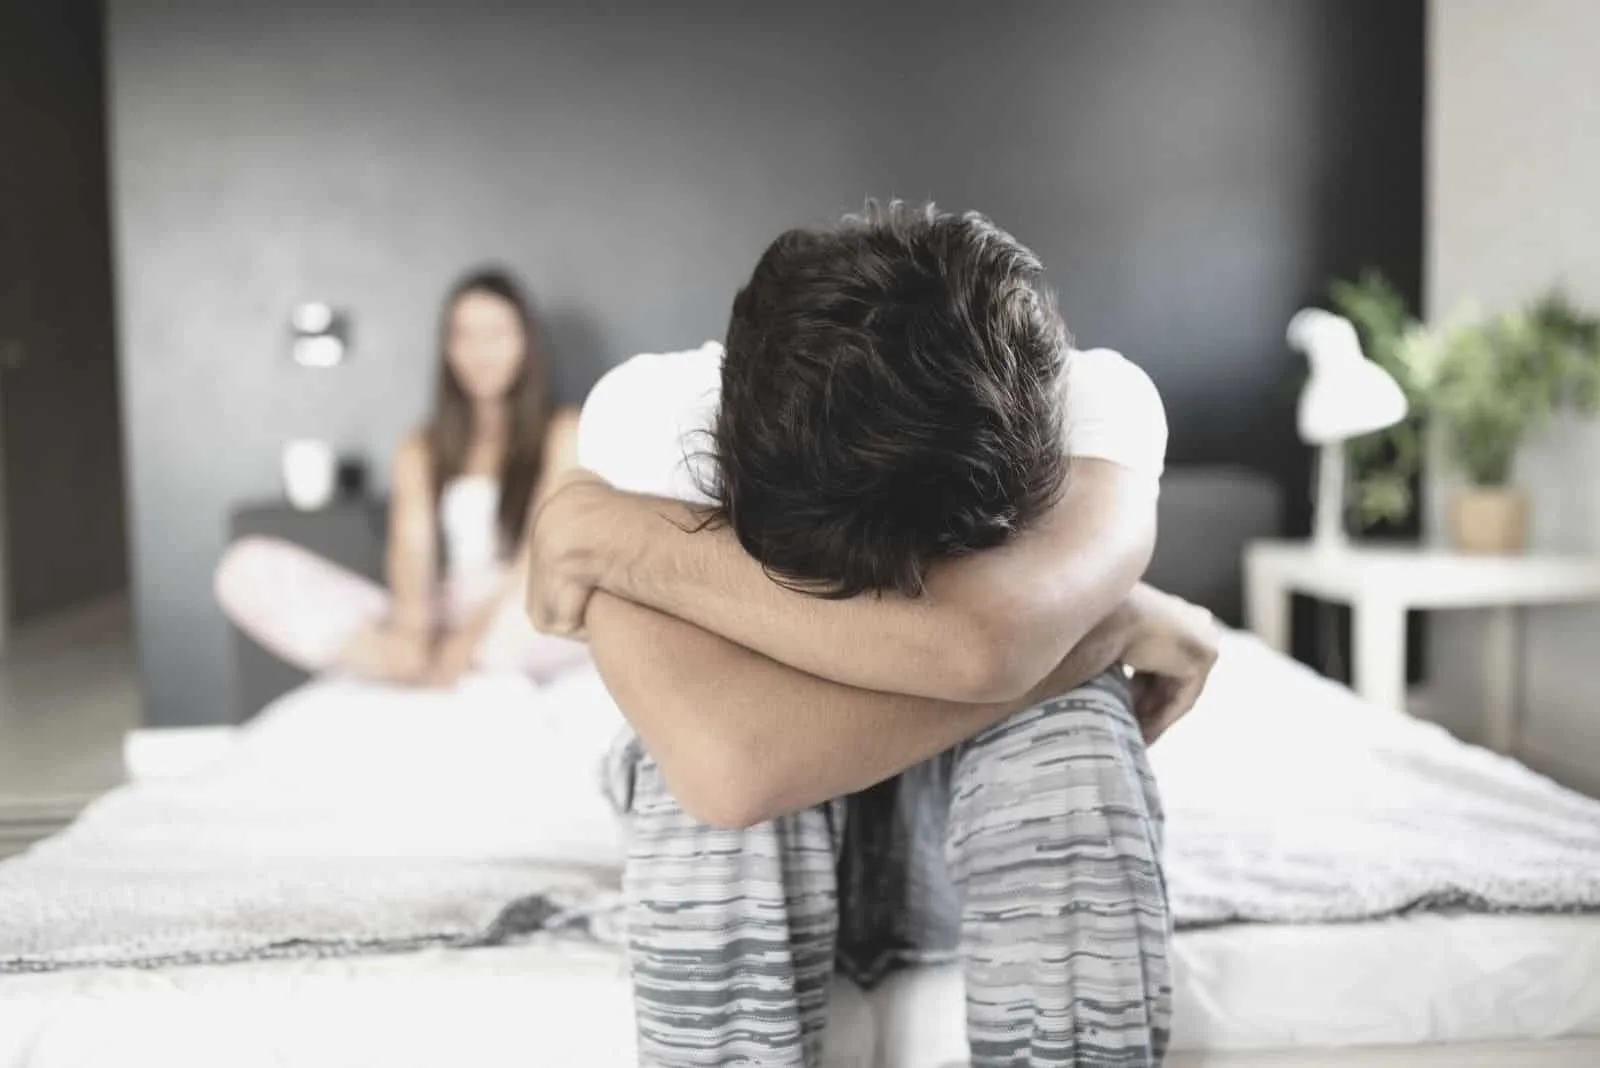 upset man in bed crying covering his face with a blurred image of a woman sitting in the same bed